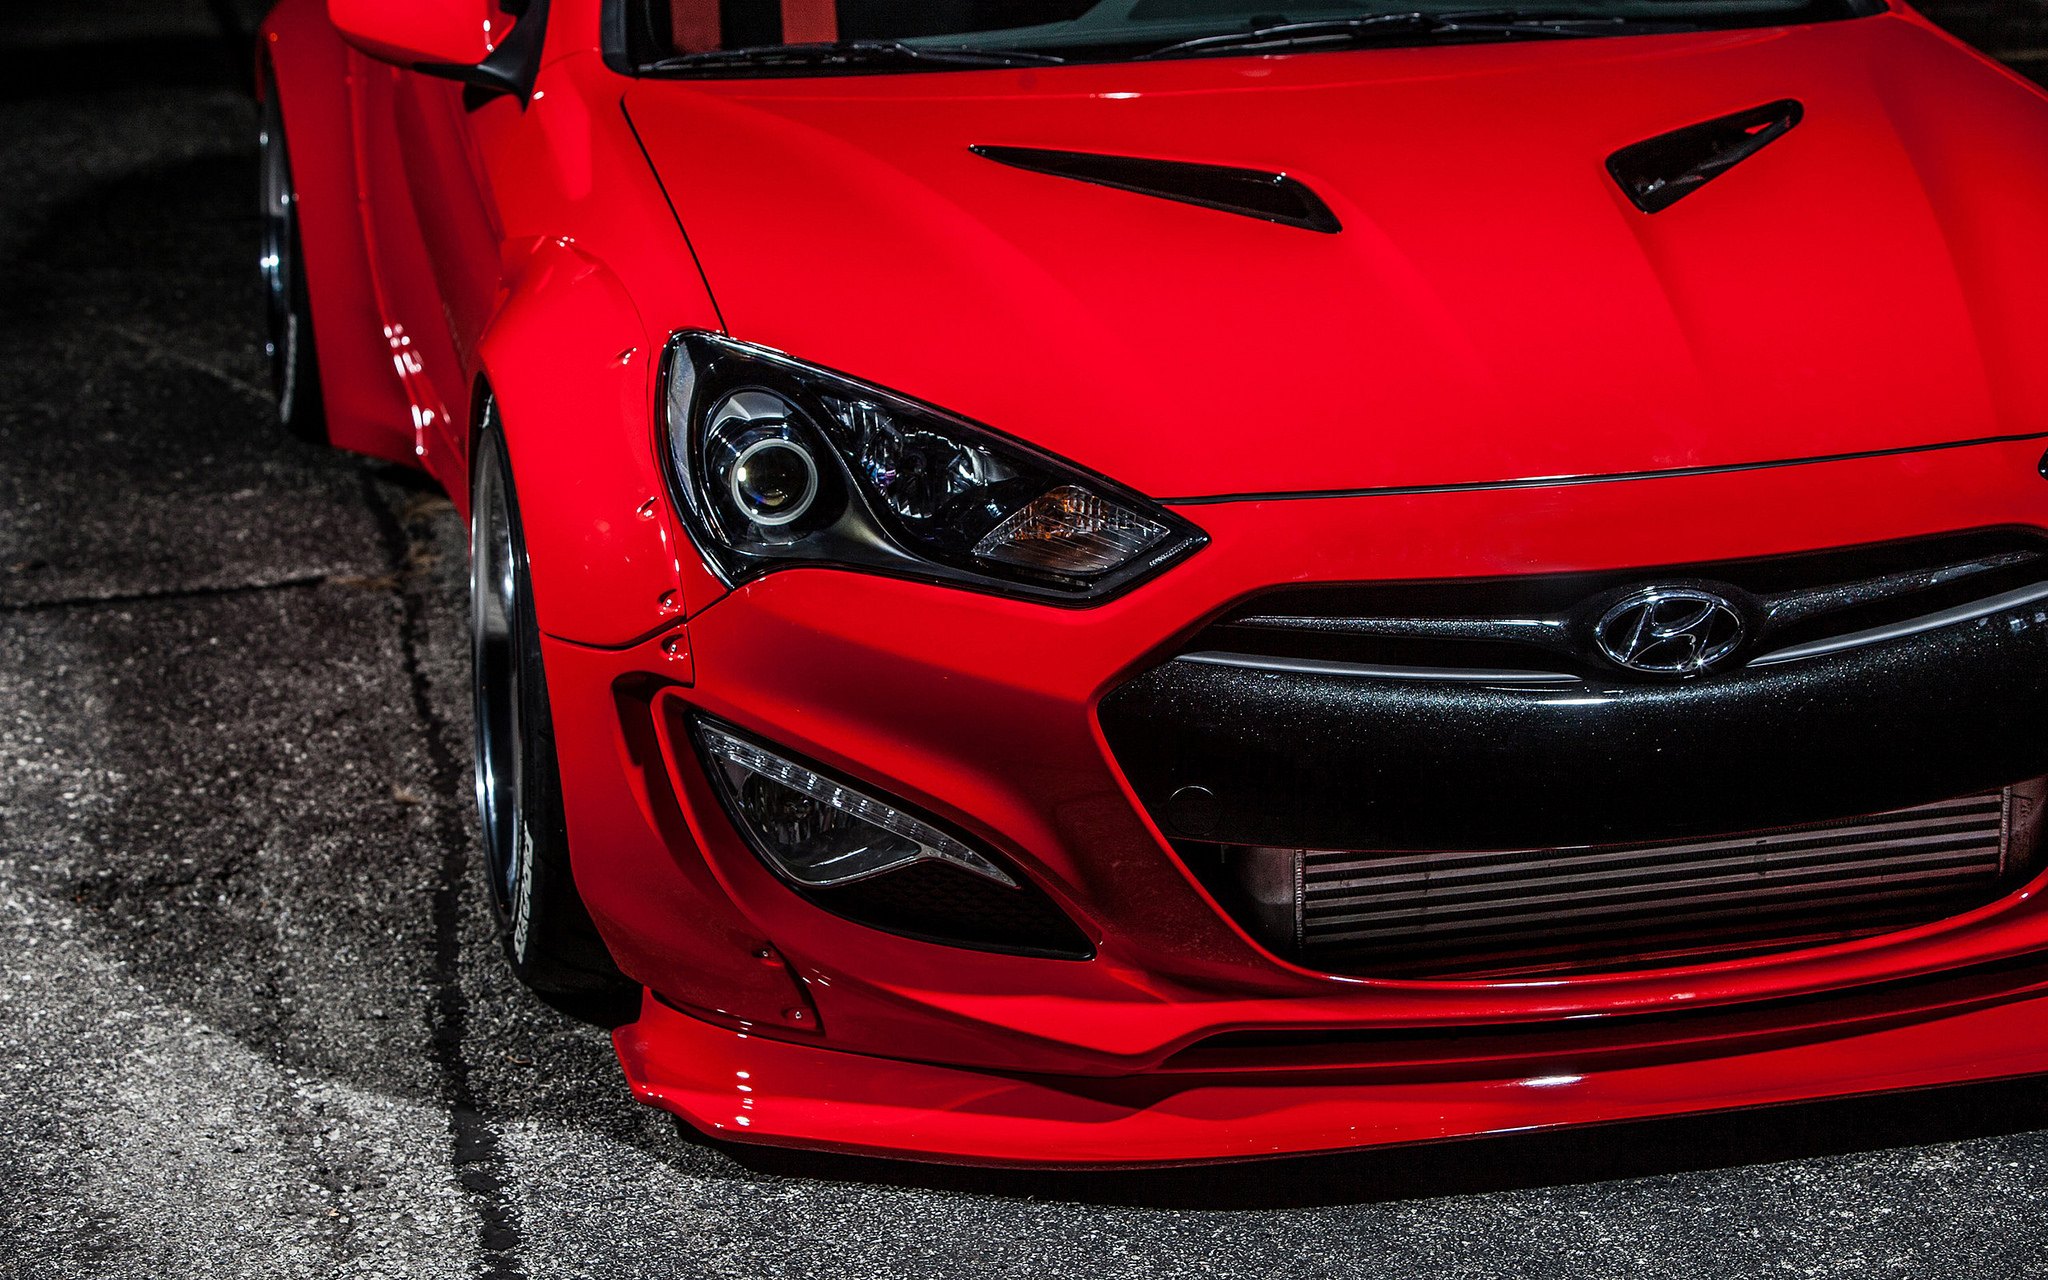 Red Hyundai Genesis Coupe with Custom Wheels - Photo by Blood Type Racing Inc